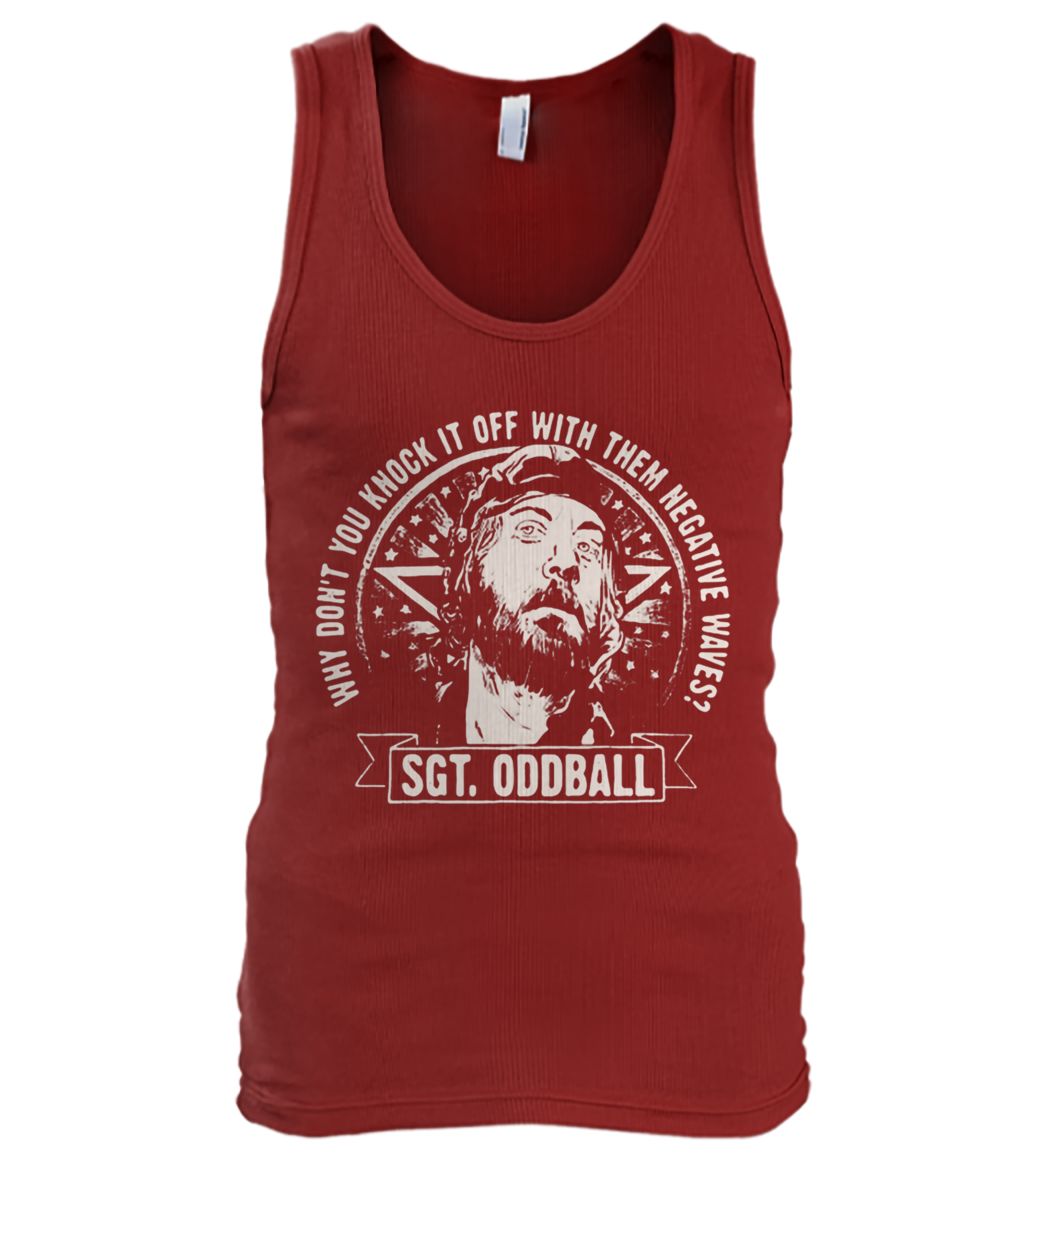 Kelly’s heroes why don't you knock it off with them negative waves sgt oddball men's tank top